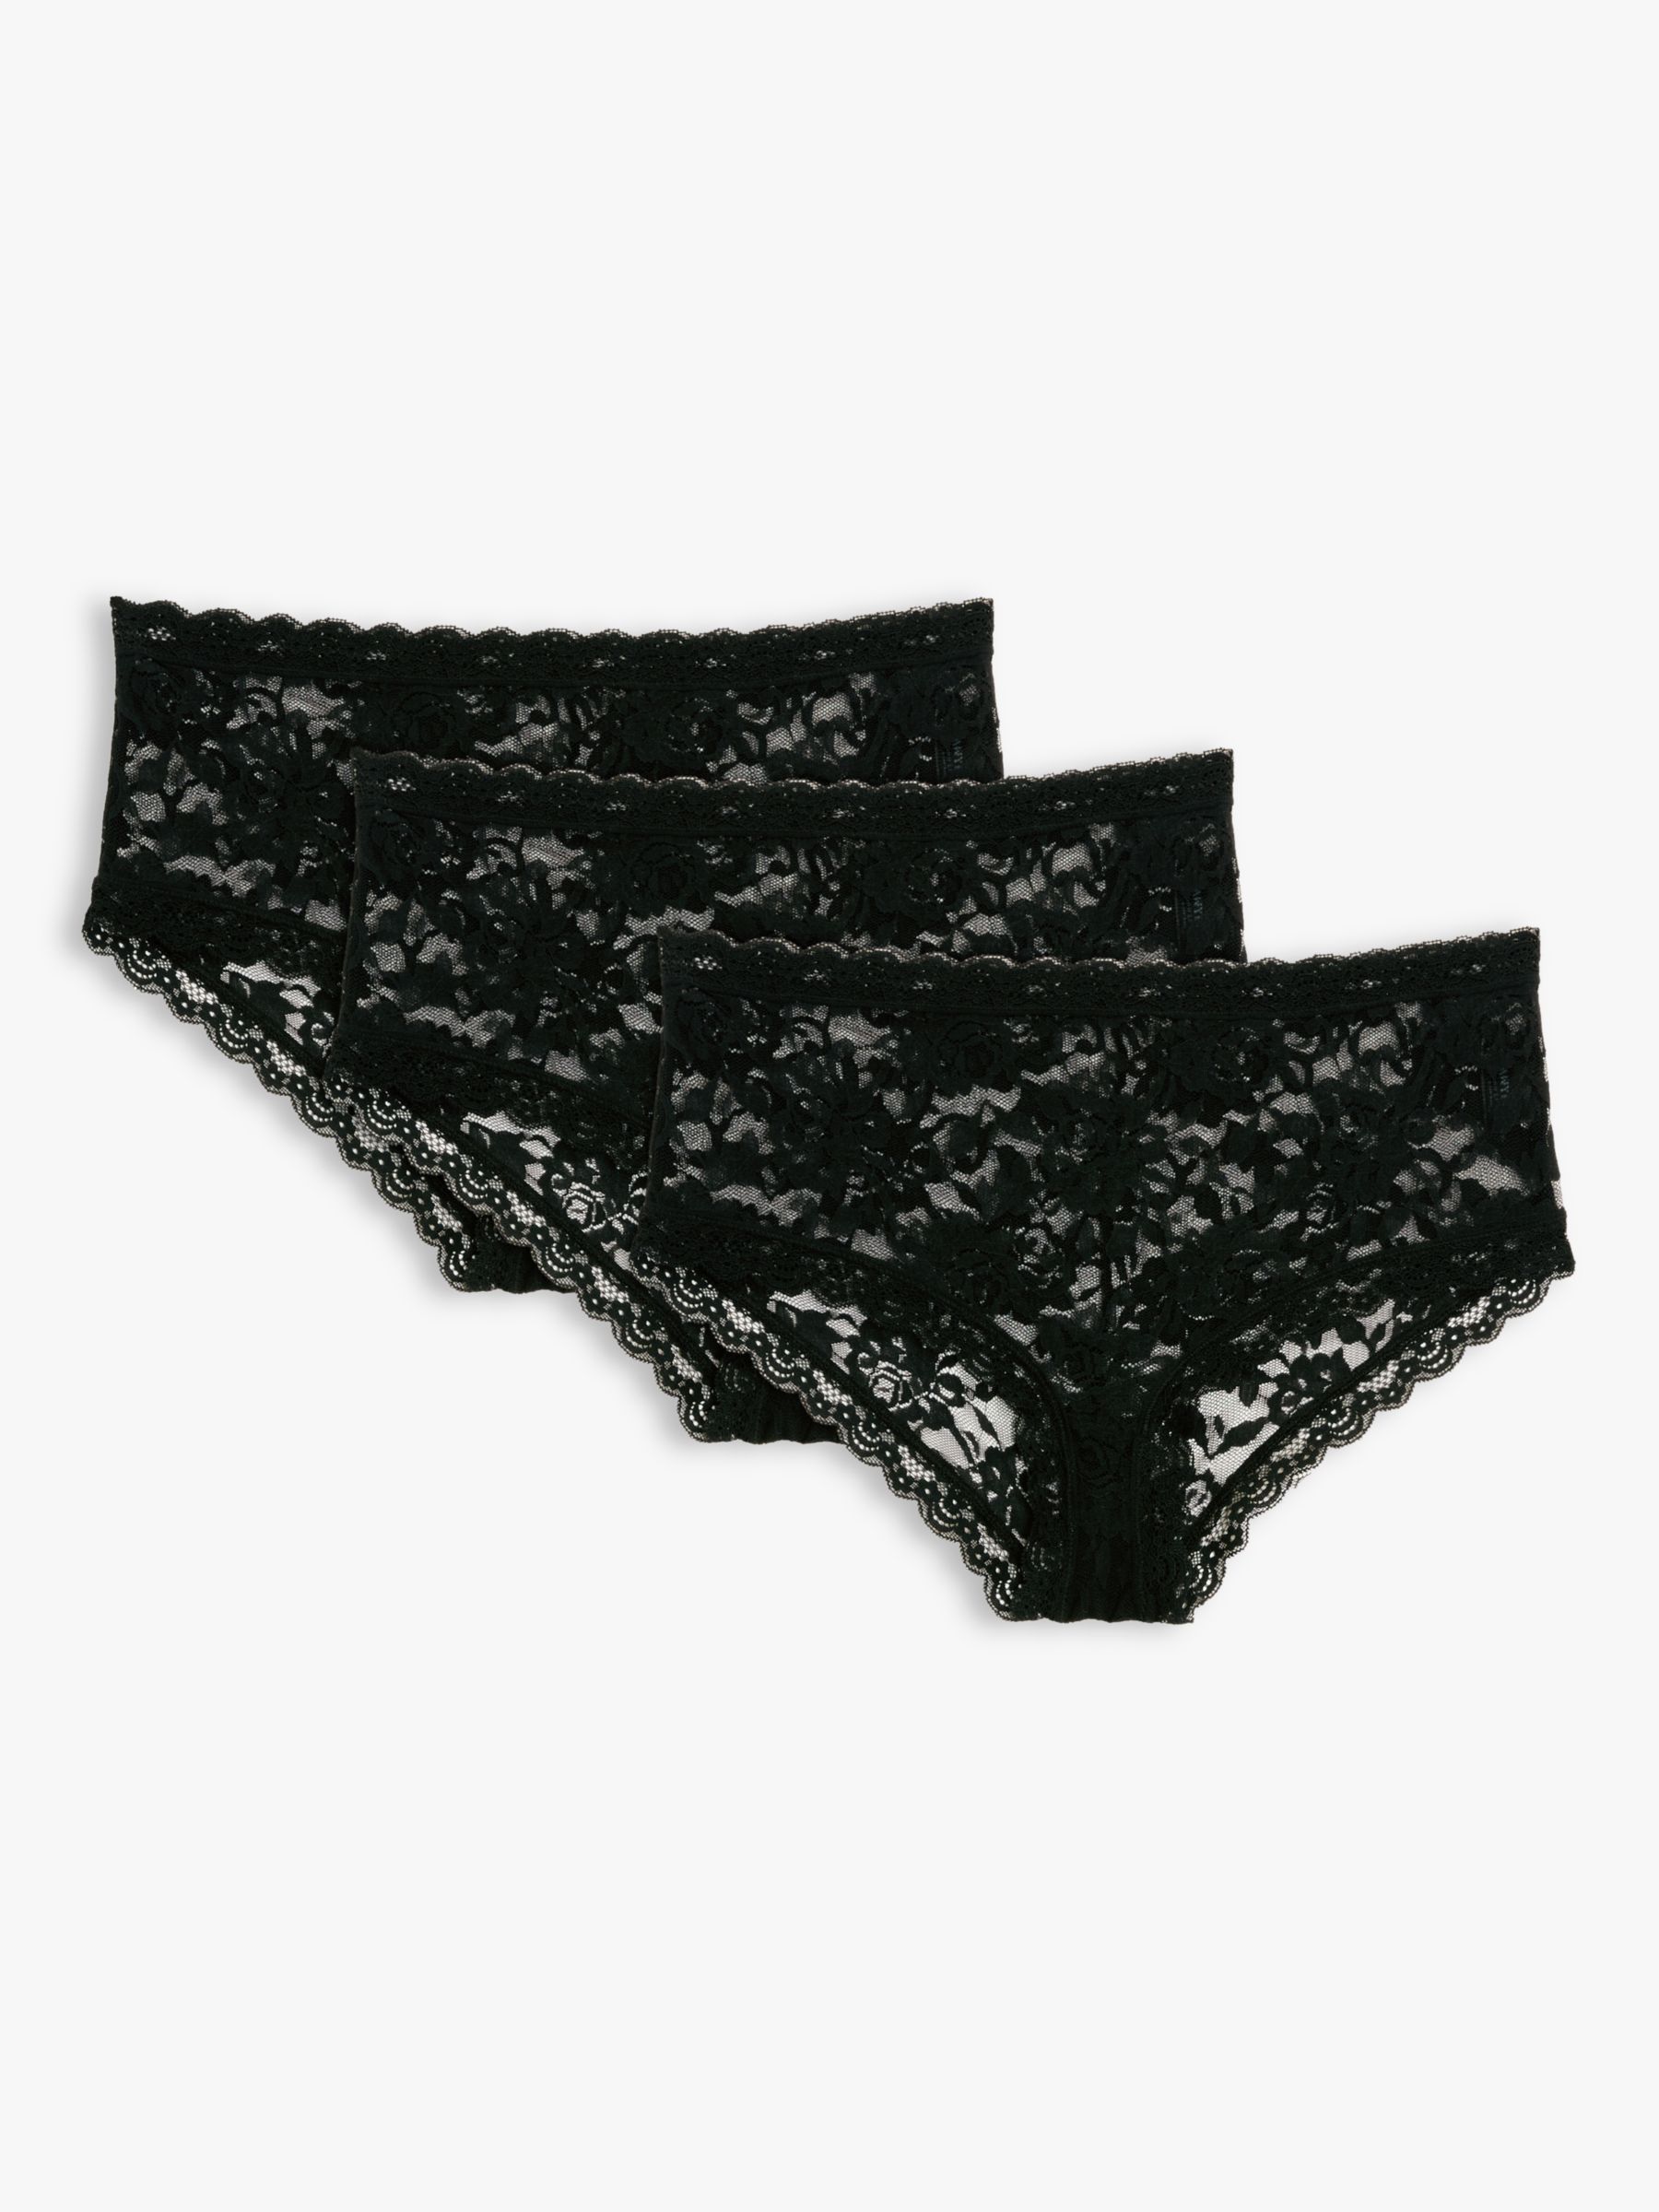 John Lewis ANYDAY Helenca Lace Short Knickers, Pack of 3, Black, 8